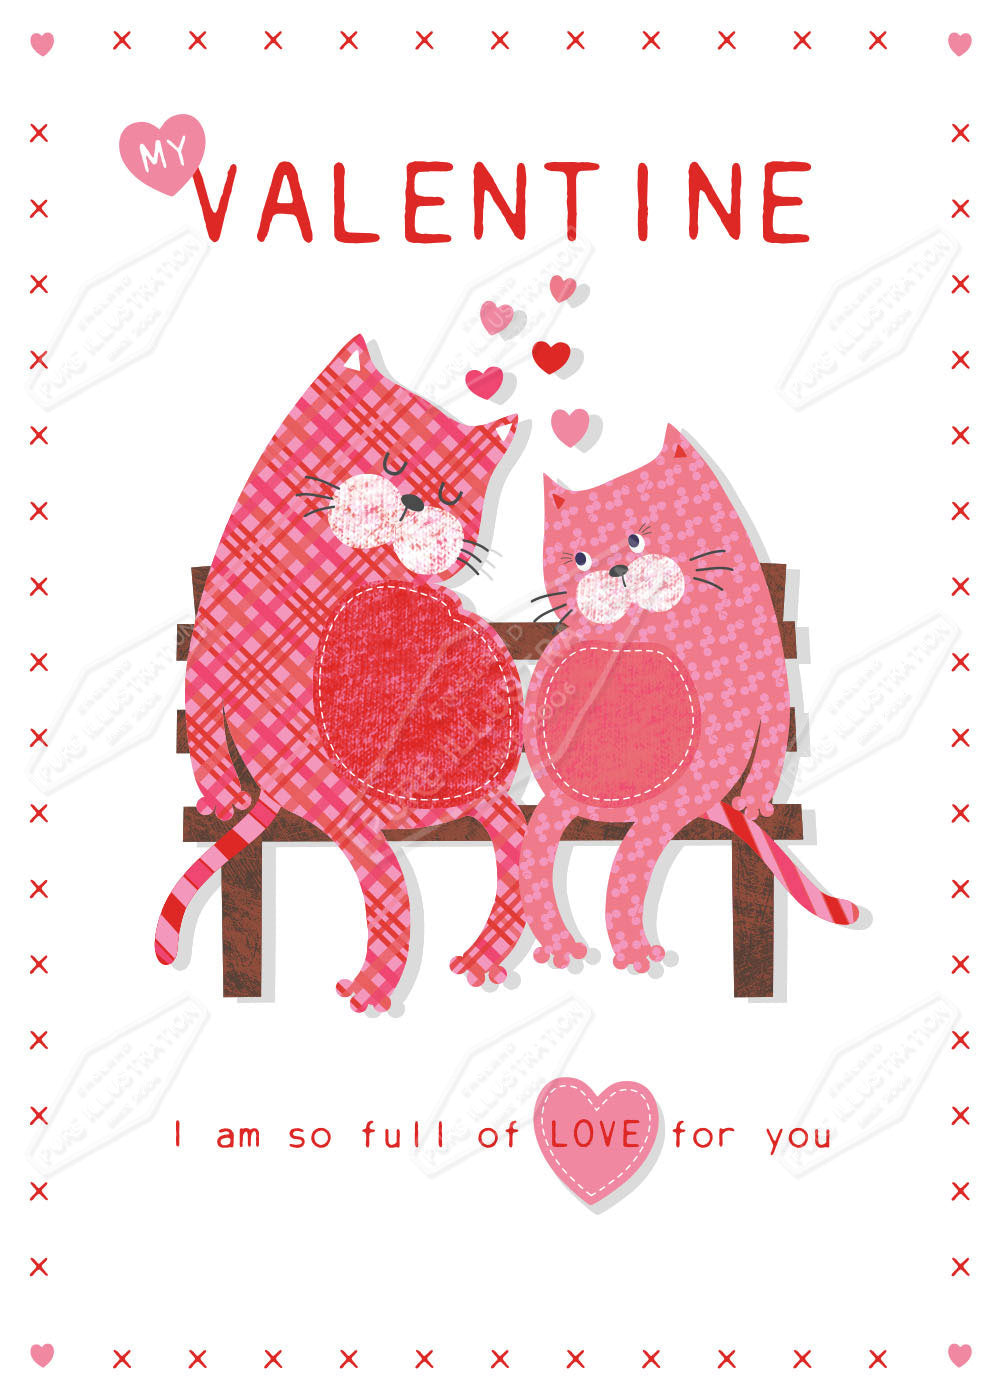 Valentines Cats Design by Gill Eggleston for Pure Art Licensing Agency & Surface Design Studio